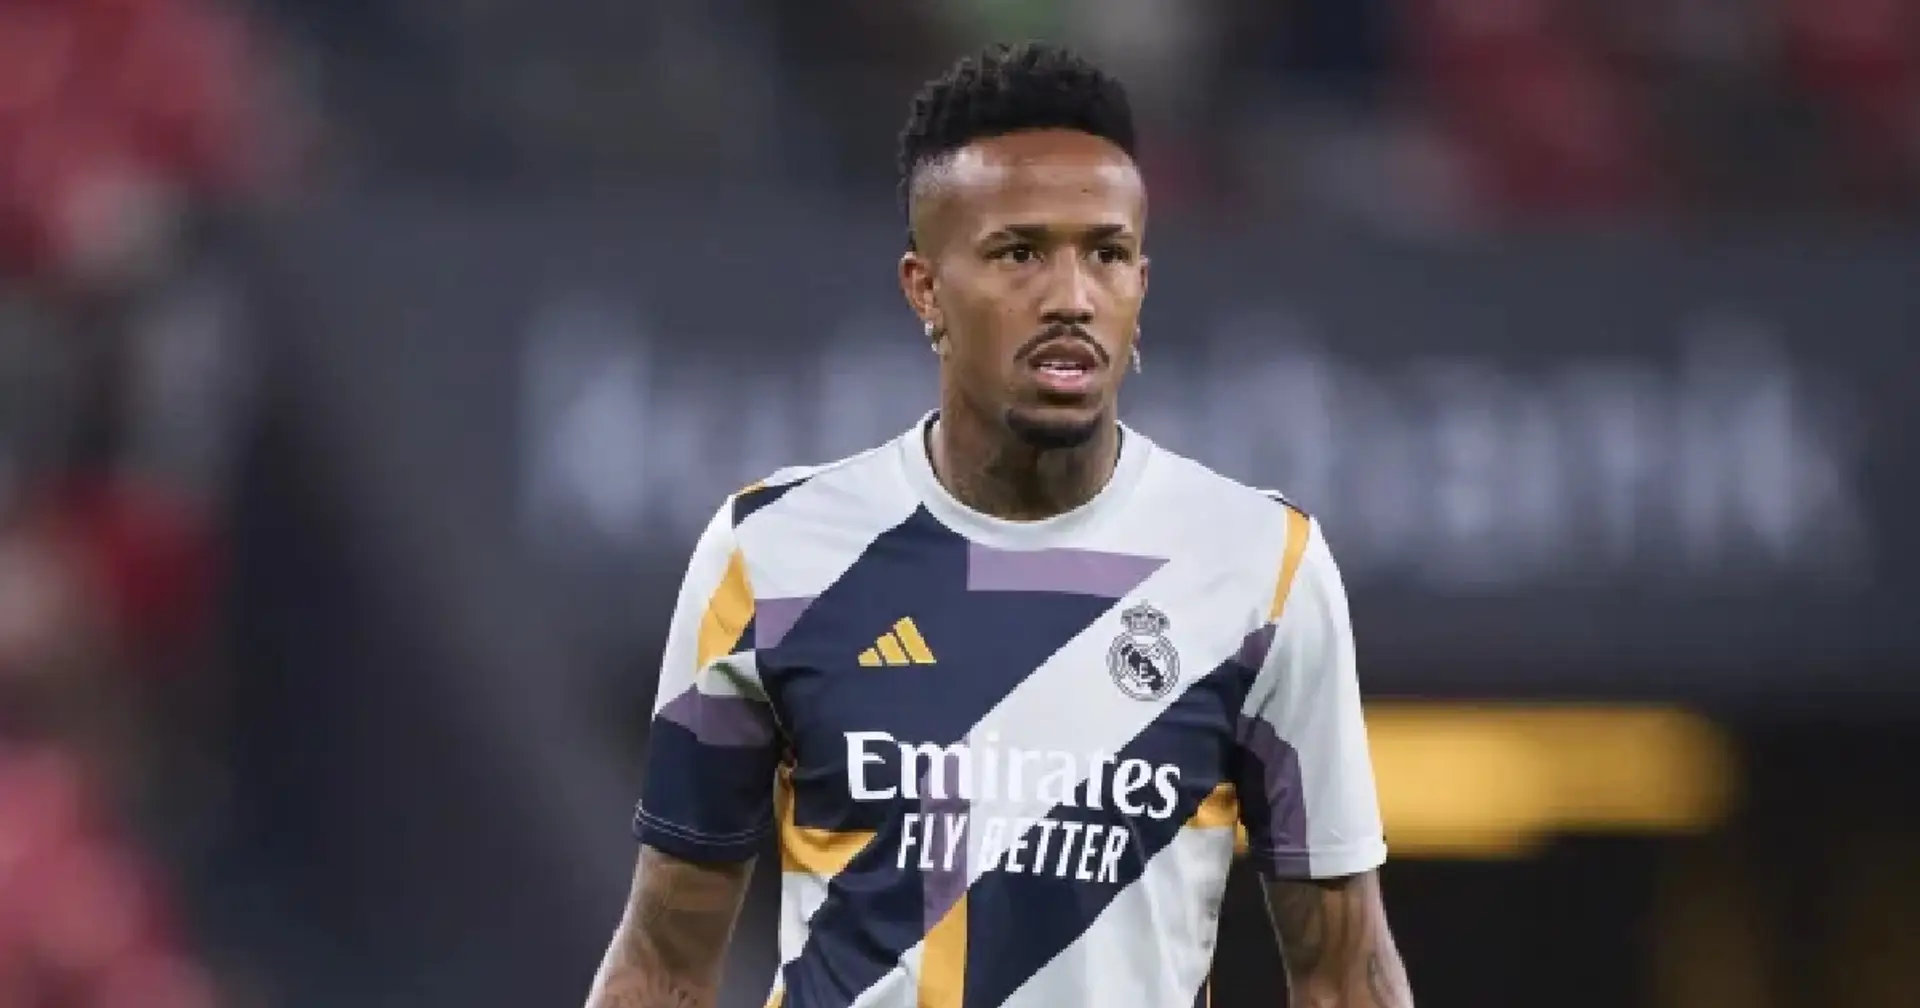 Militao back for Real Madrid & 2 more big stories you might've missed